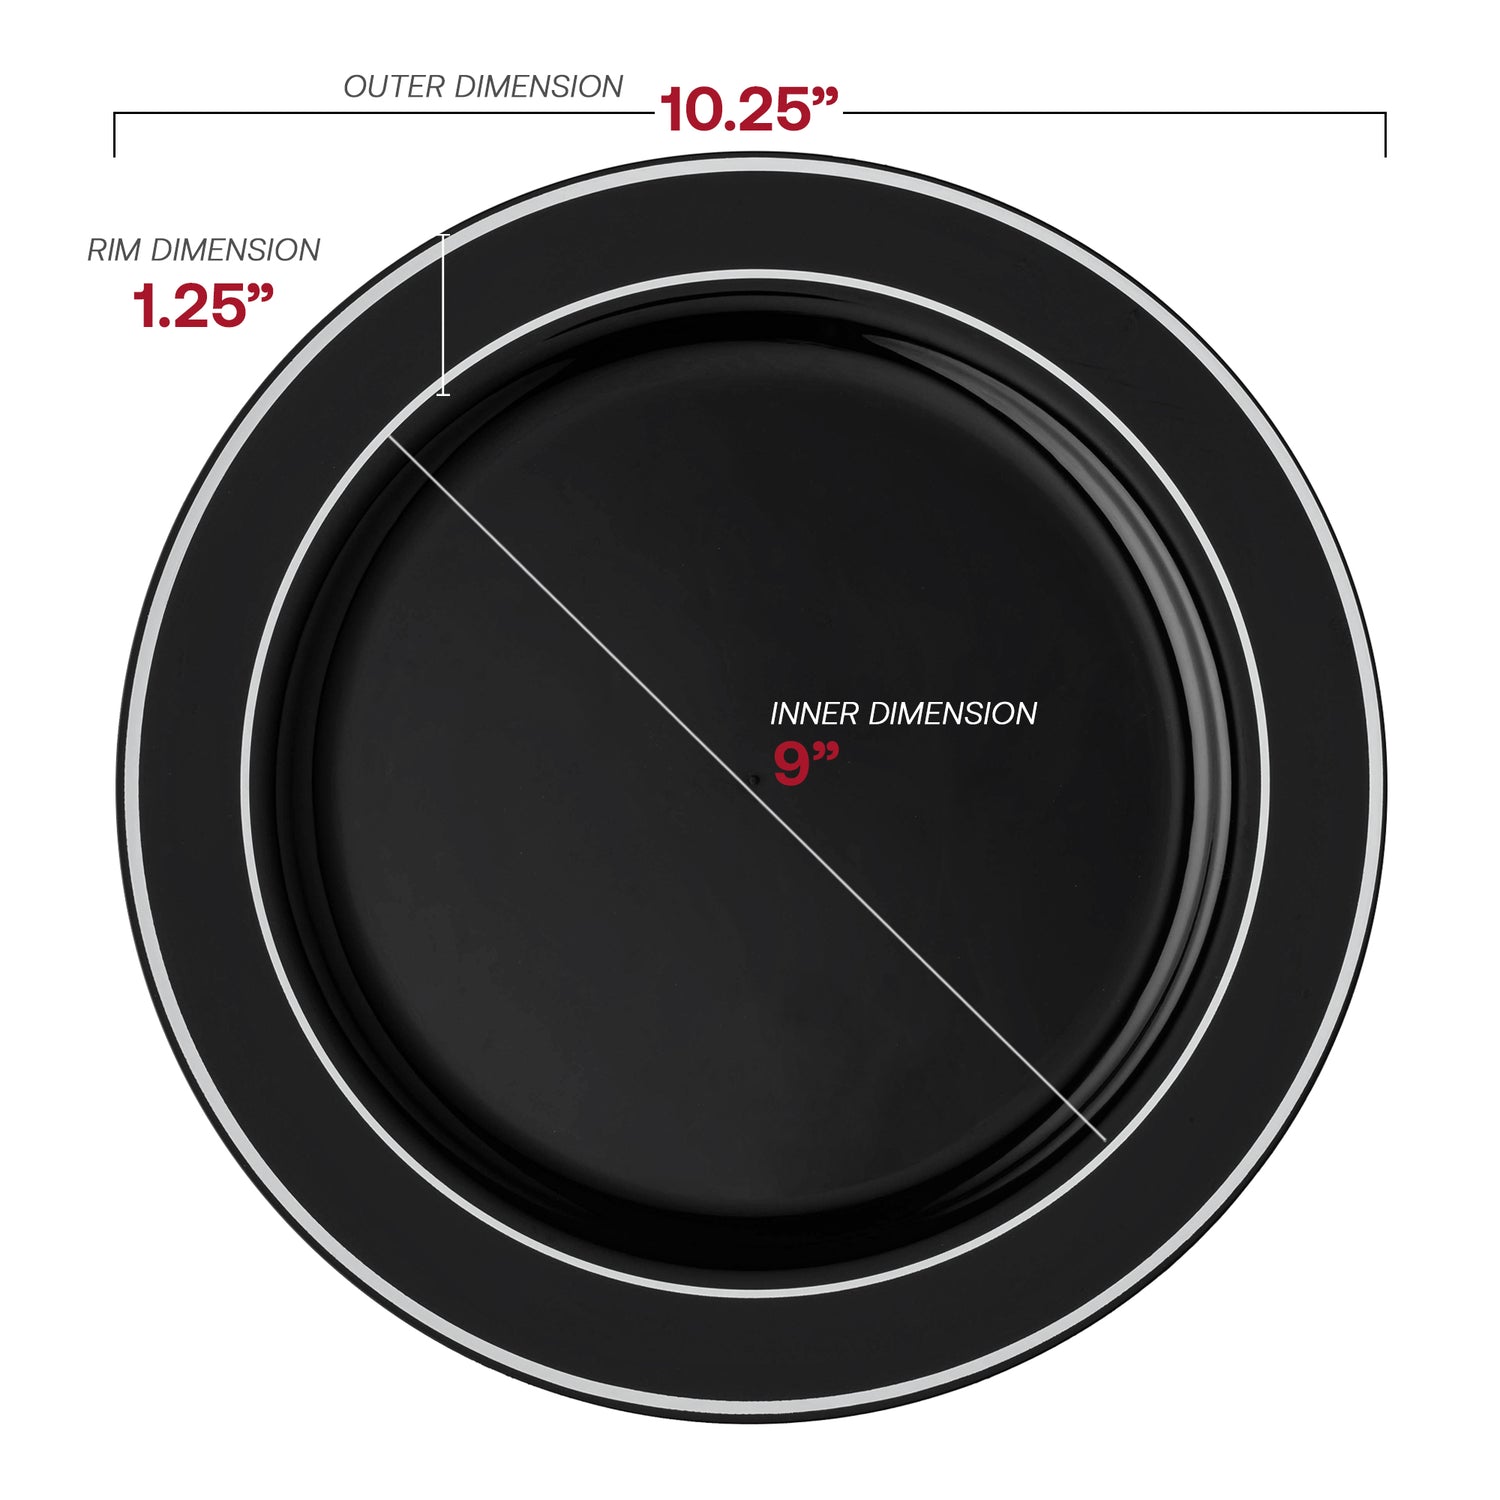 Black with Silver Edge Rim Plastic Dinner Plates (10.25") Dimension | The Kaya Collection